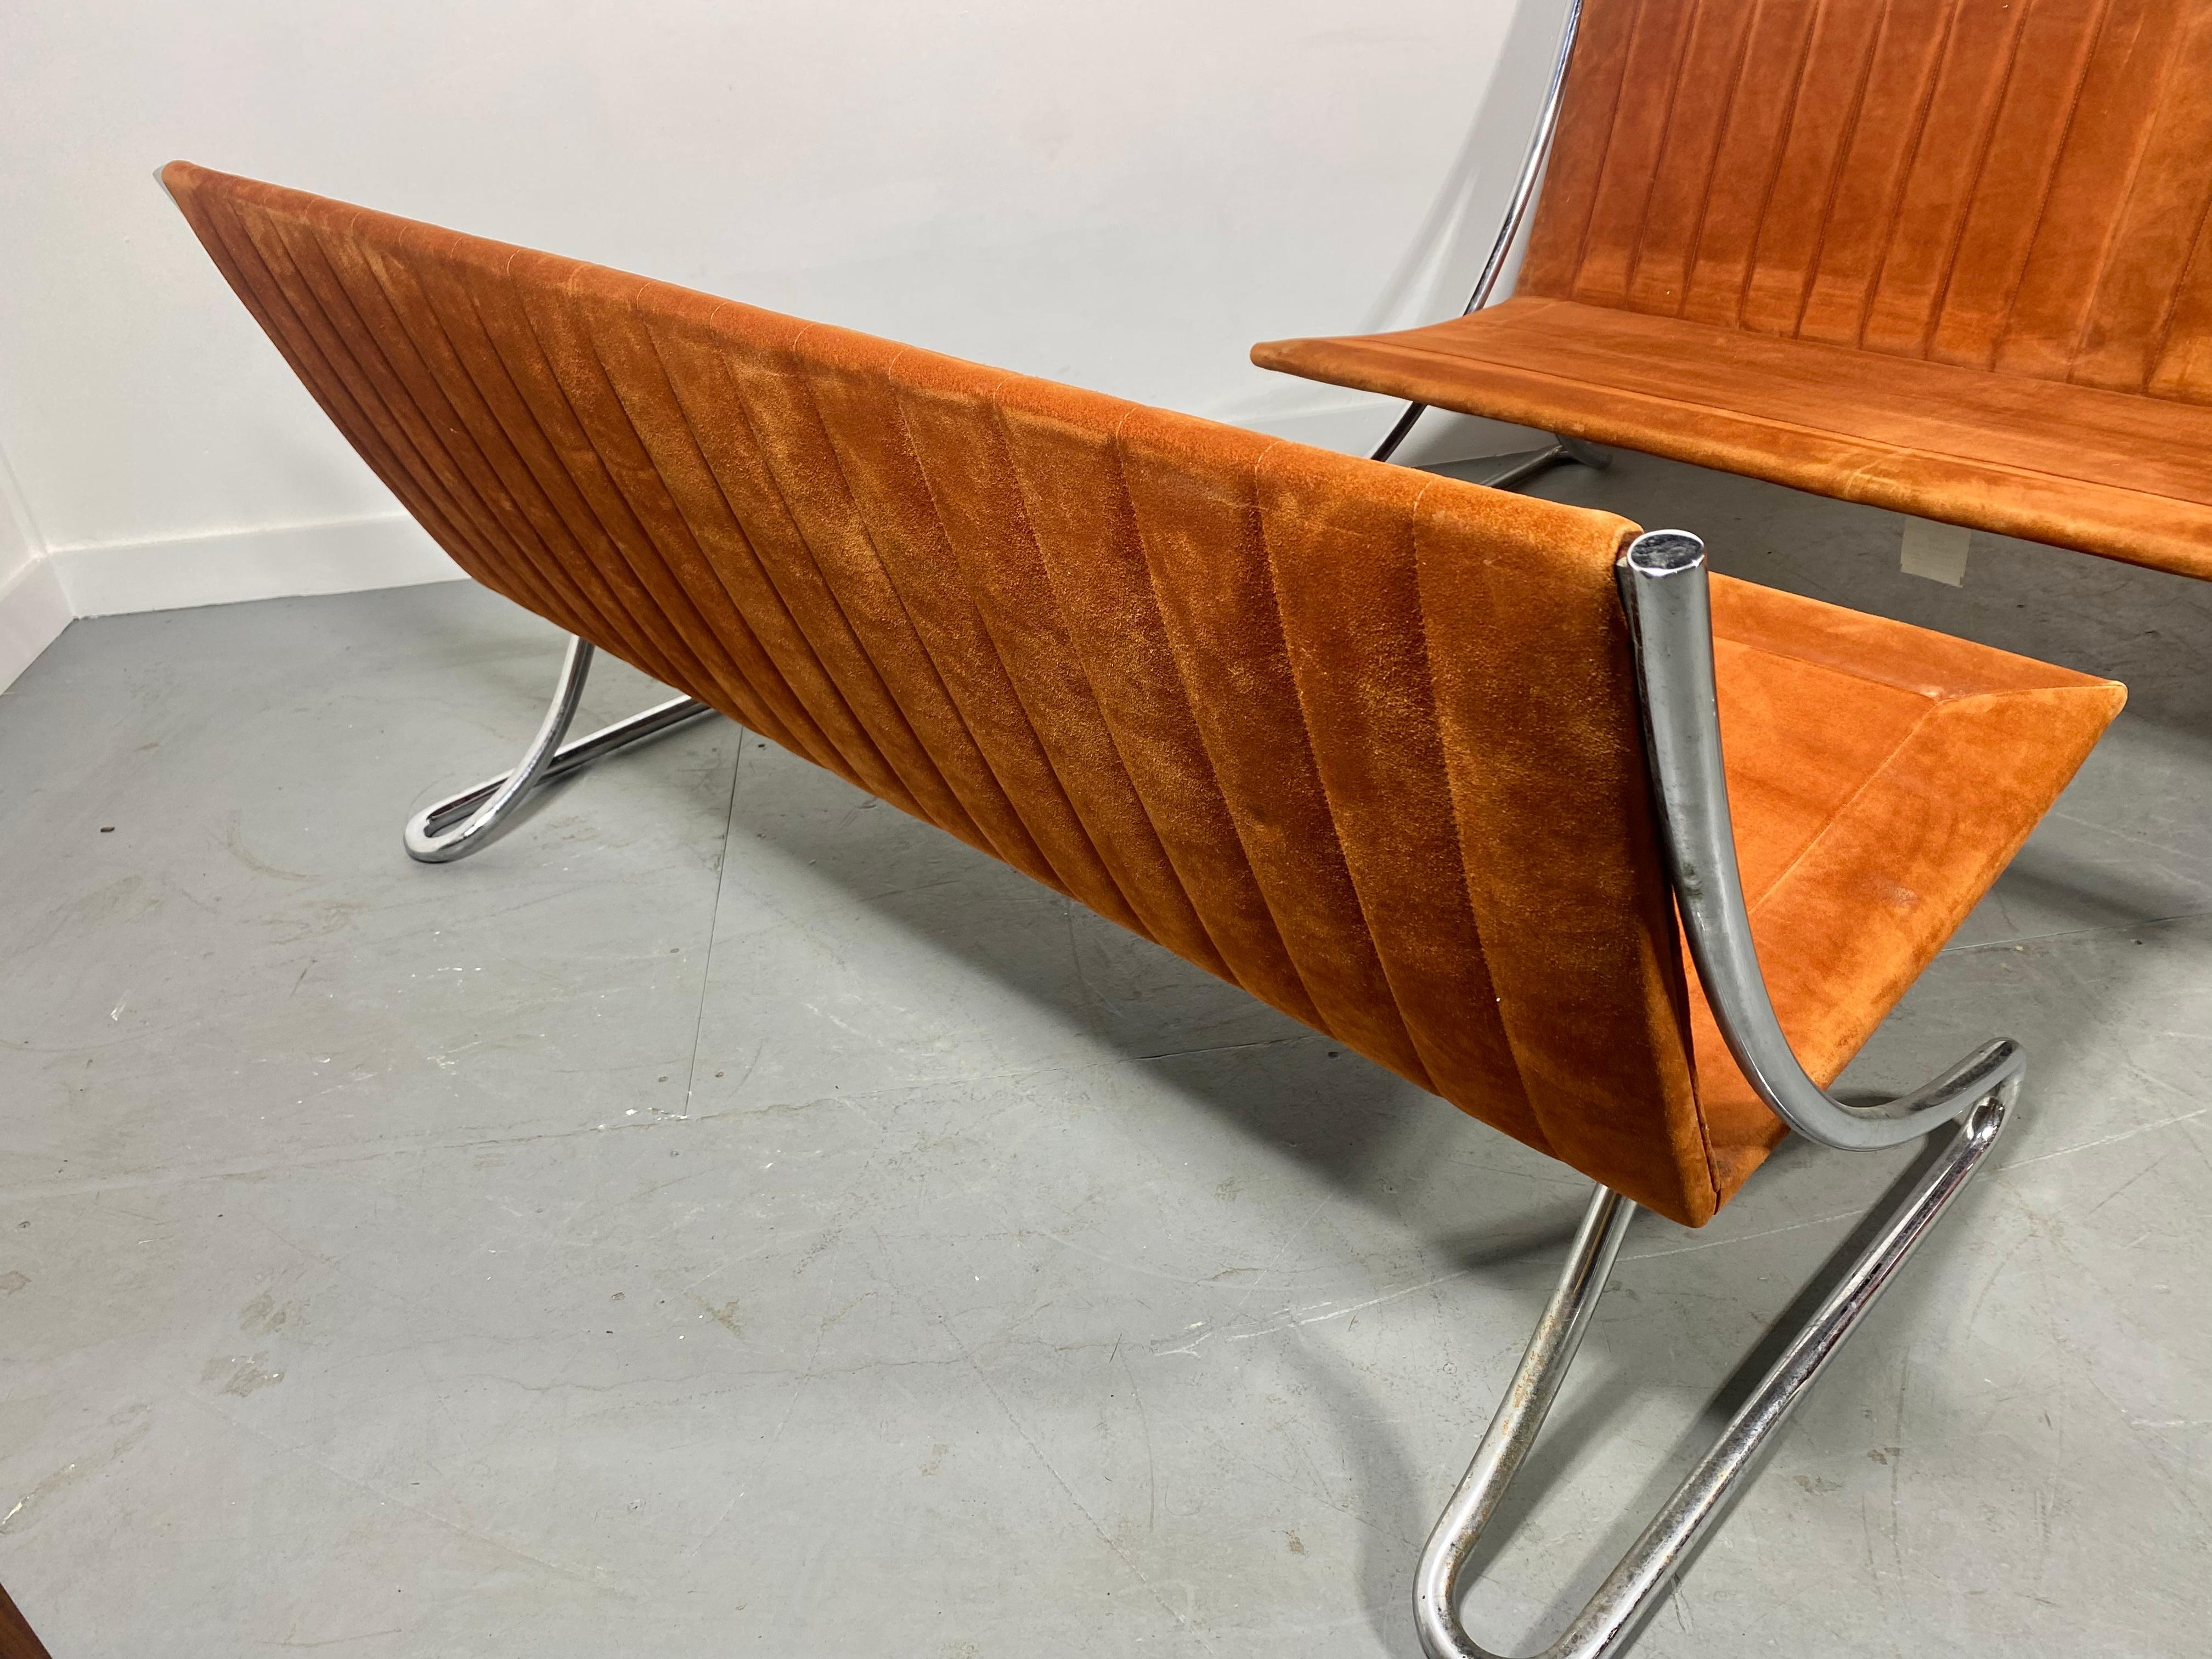 Extremely Rare Pair of Mid-Century Modern sette's designed by famed Canadian modernist Leif Jacobsen. The sette's retain they're original burnt orange suede. abscent of original seat cushions. Retain original labels. This design was executed in the